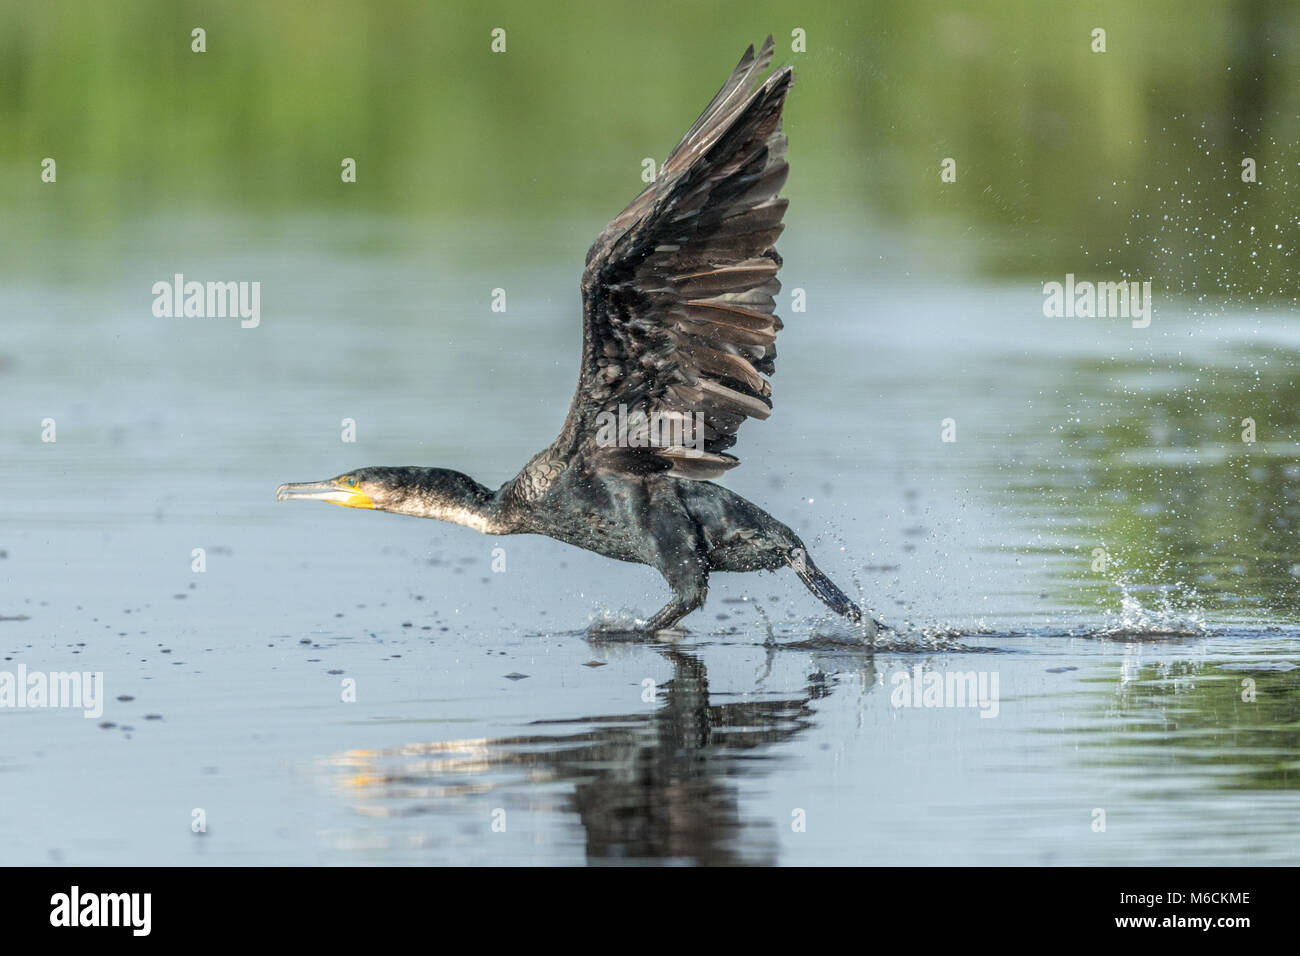 Great cormorant (Phalacrocorax carbo), known as the great black cormorant in flight, Victoria Nile, 'Murchison's Falls National Park', Uganda, Africa Stock Photo